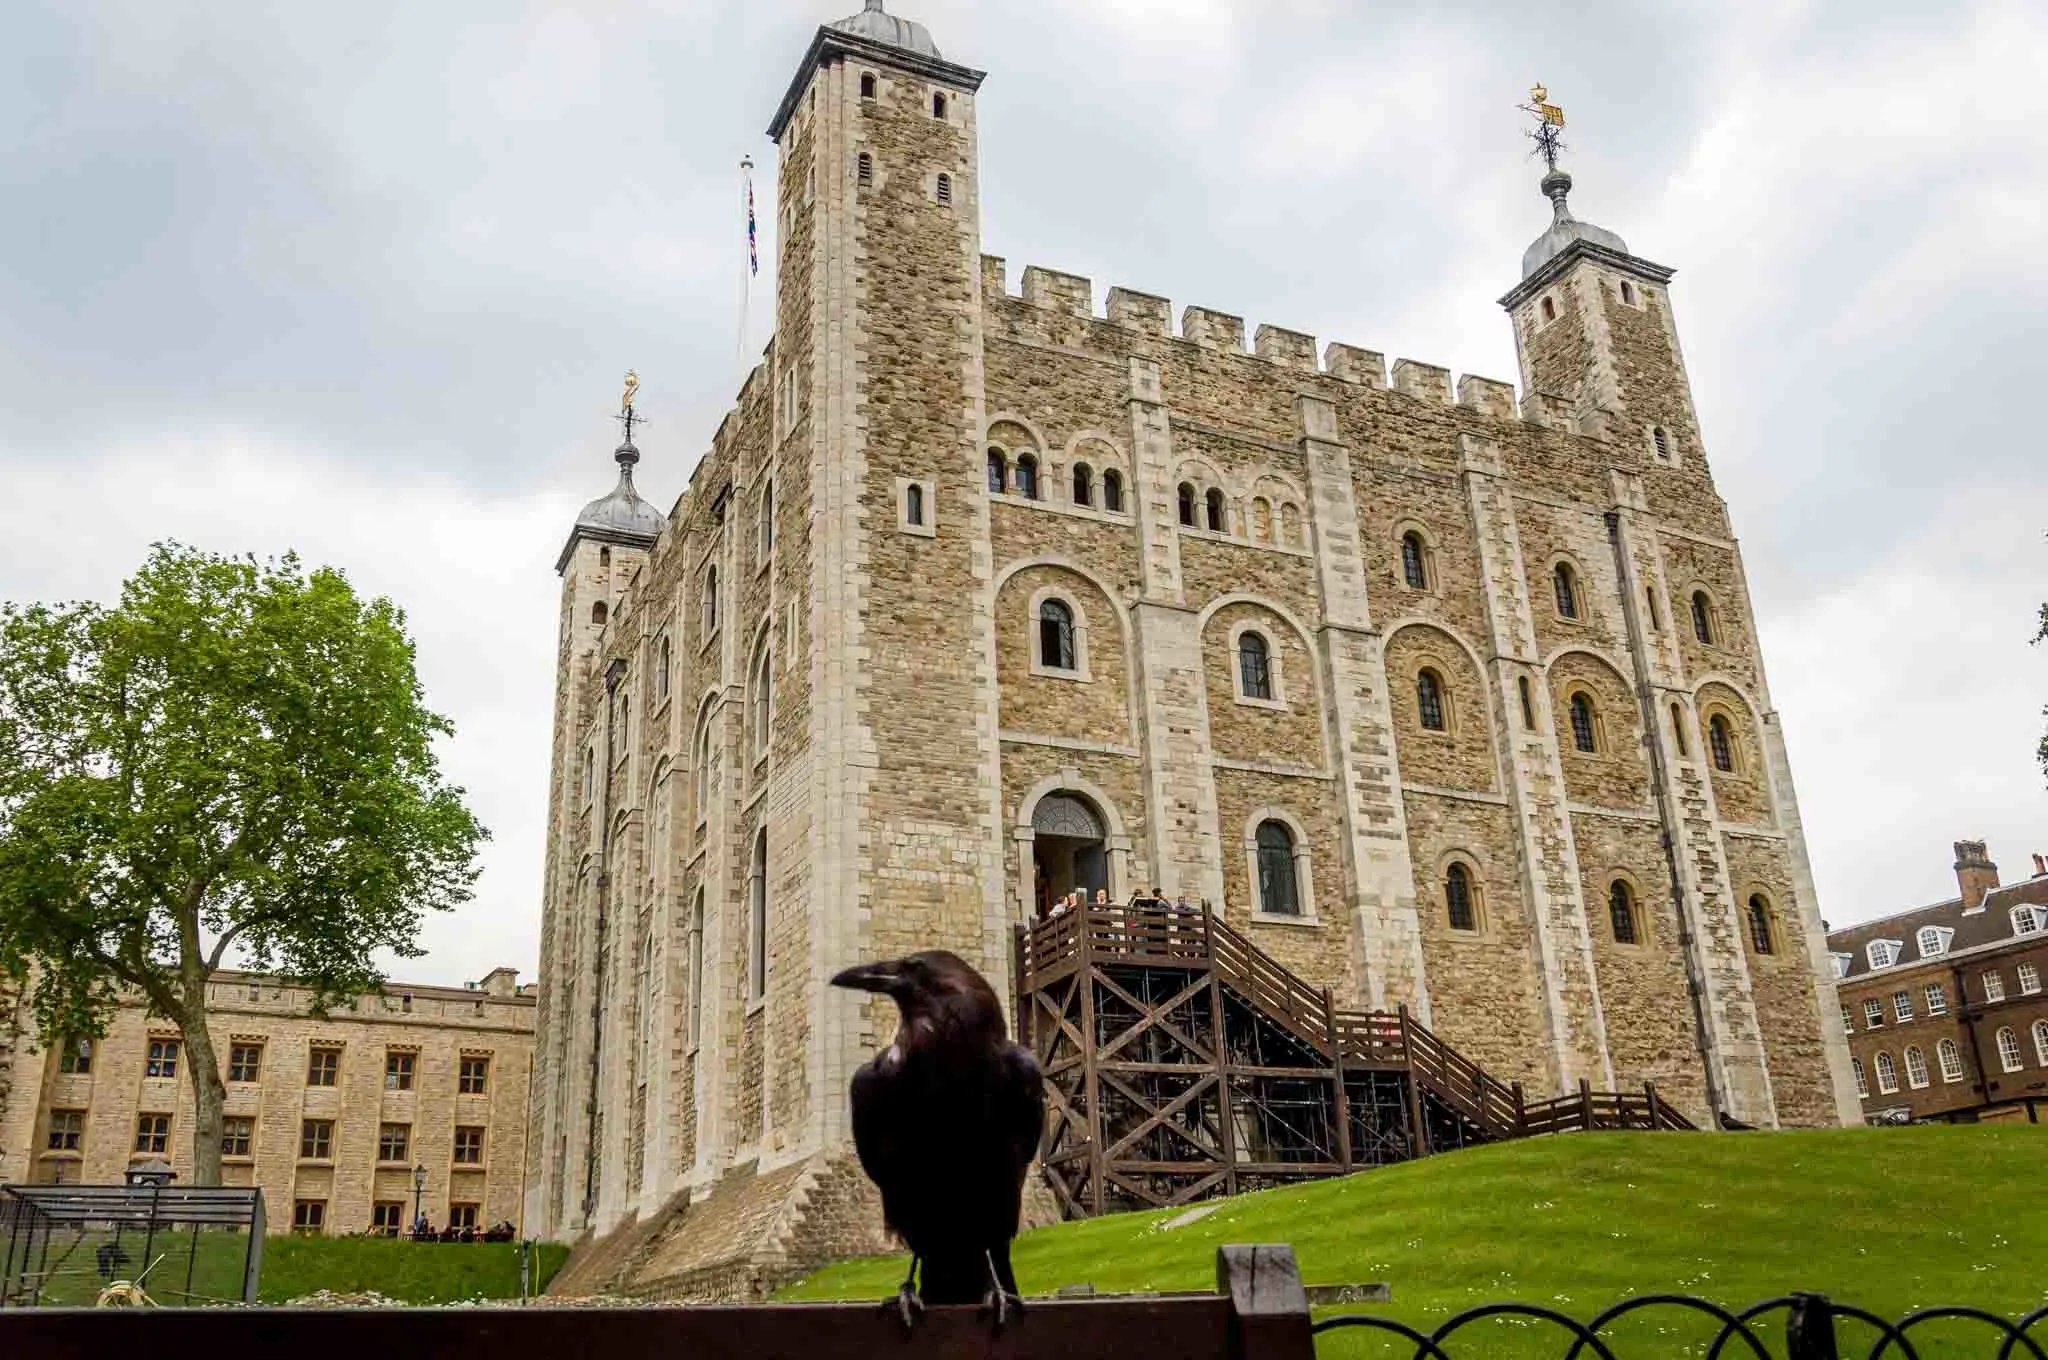 Raven in front of large stone building with turrets, the Tower of London